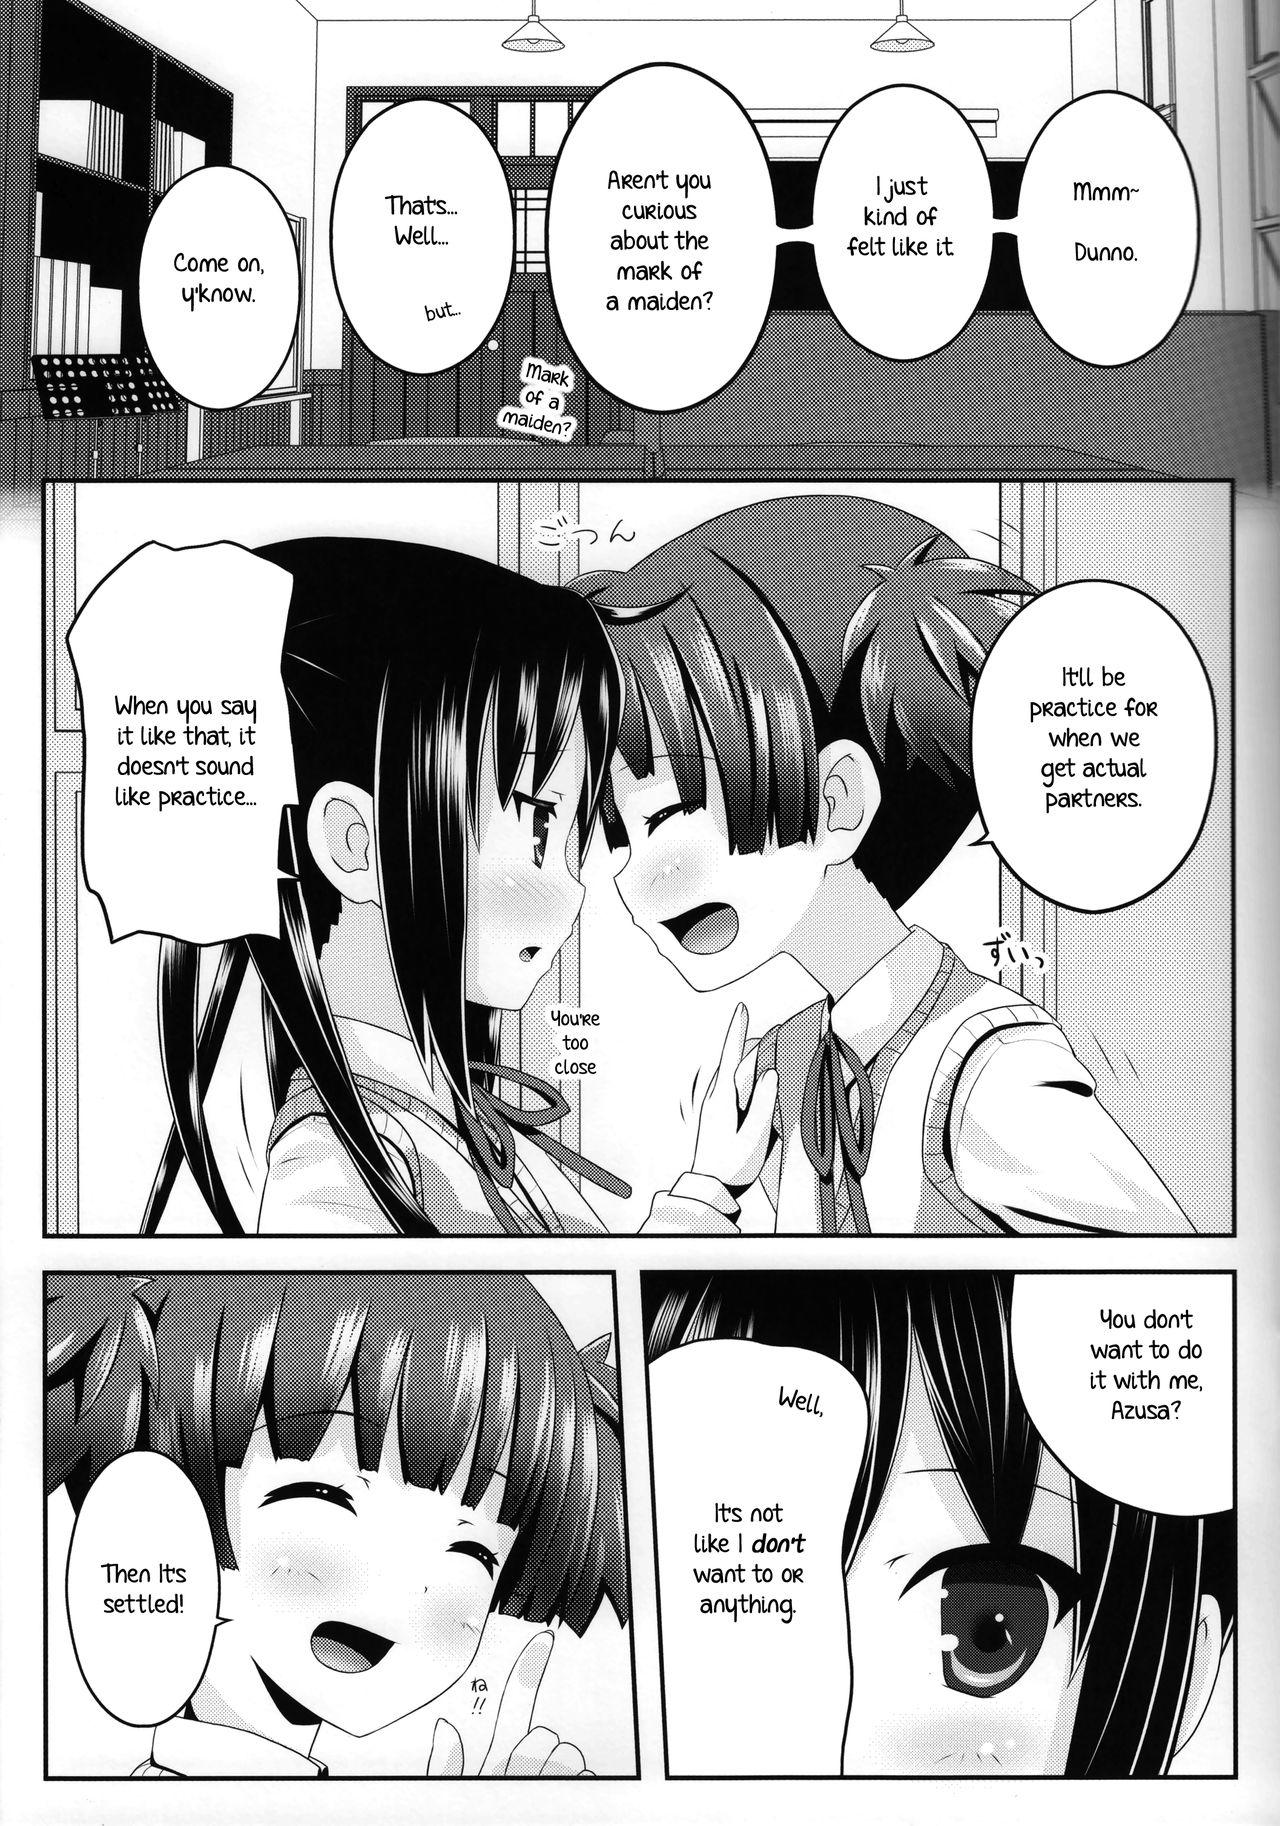 Mexican Girls’ Talk - K-on Money - Page 10